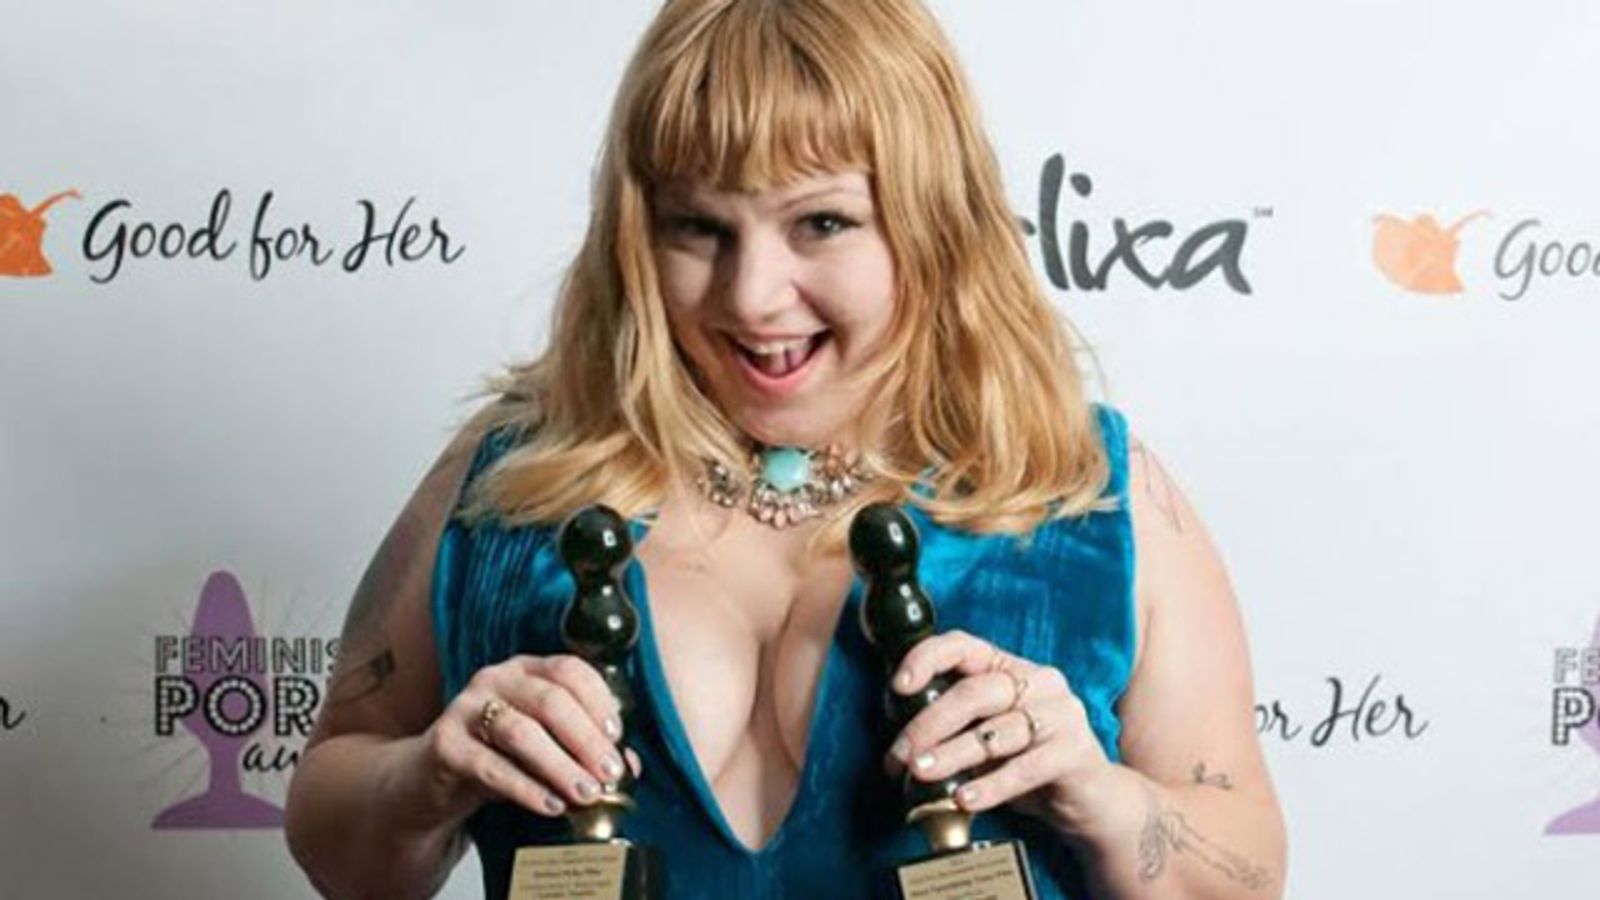 TROUBLEfilms Takes Home Two Feminist Porn Awards in 2014